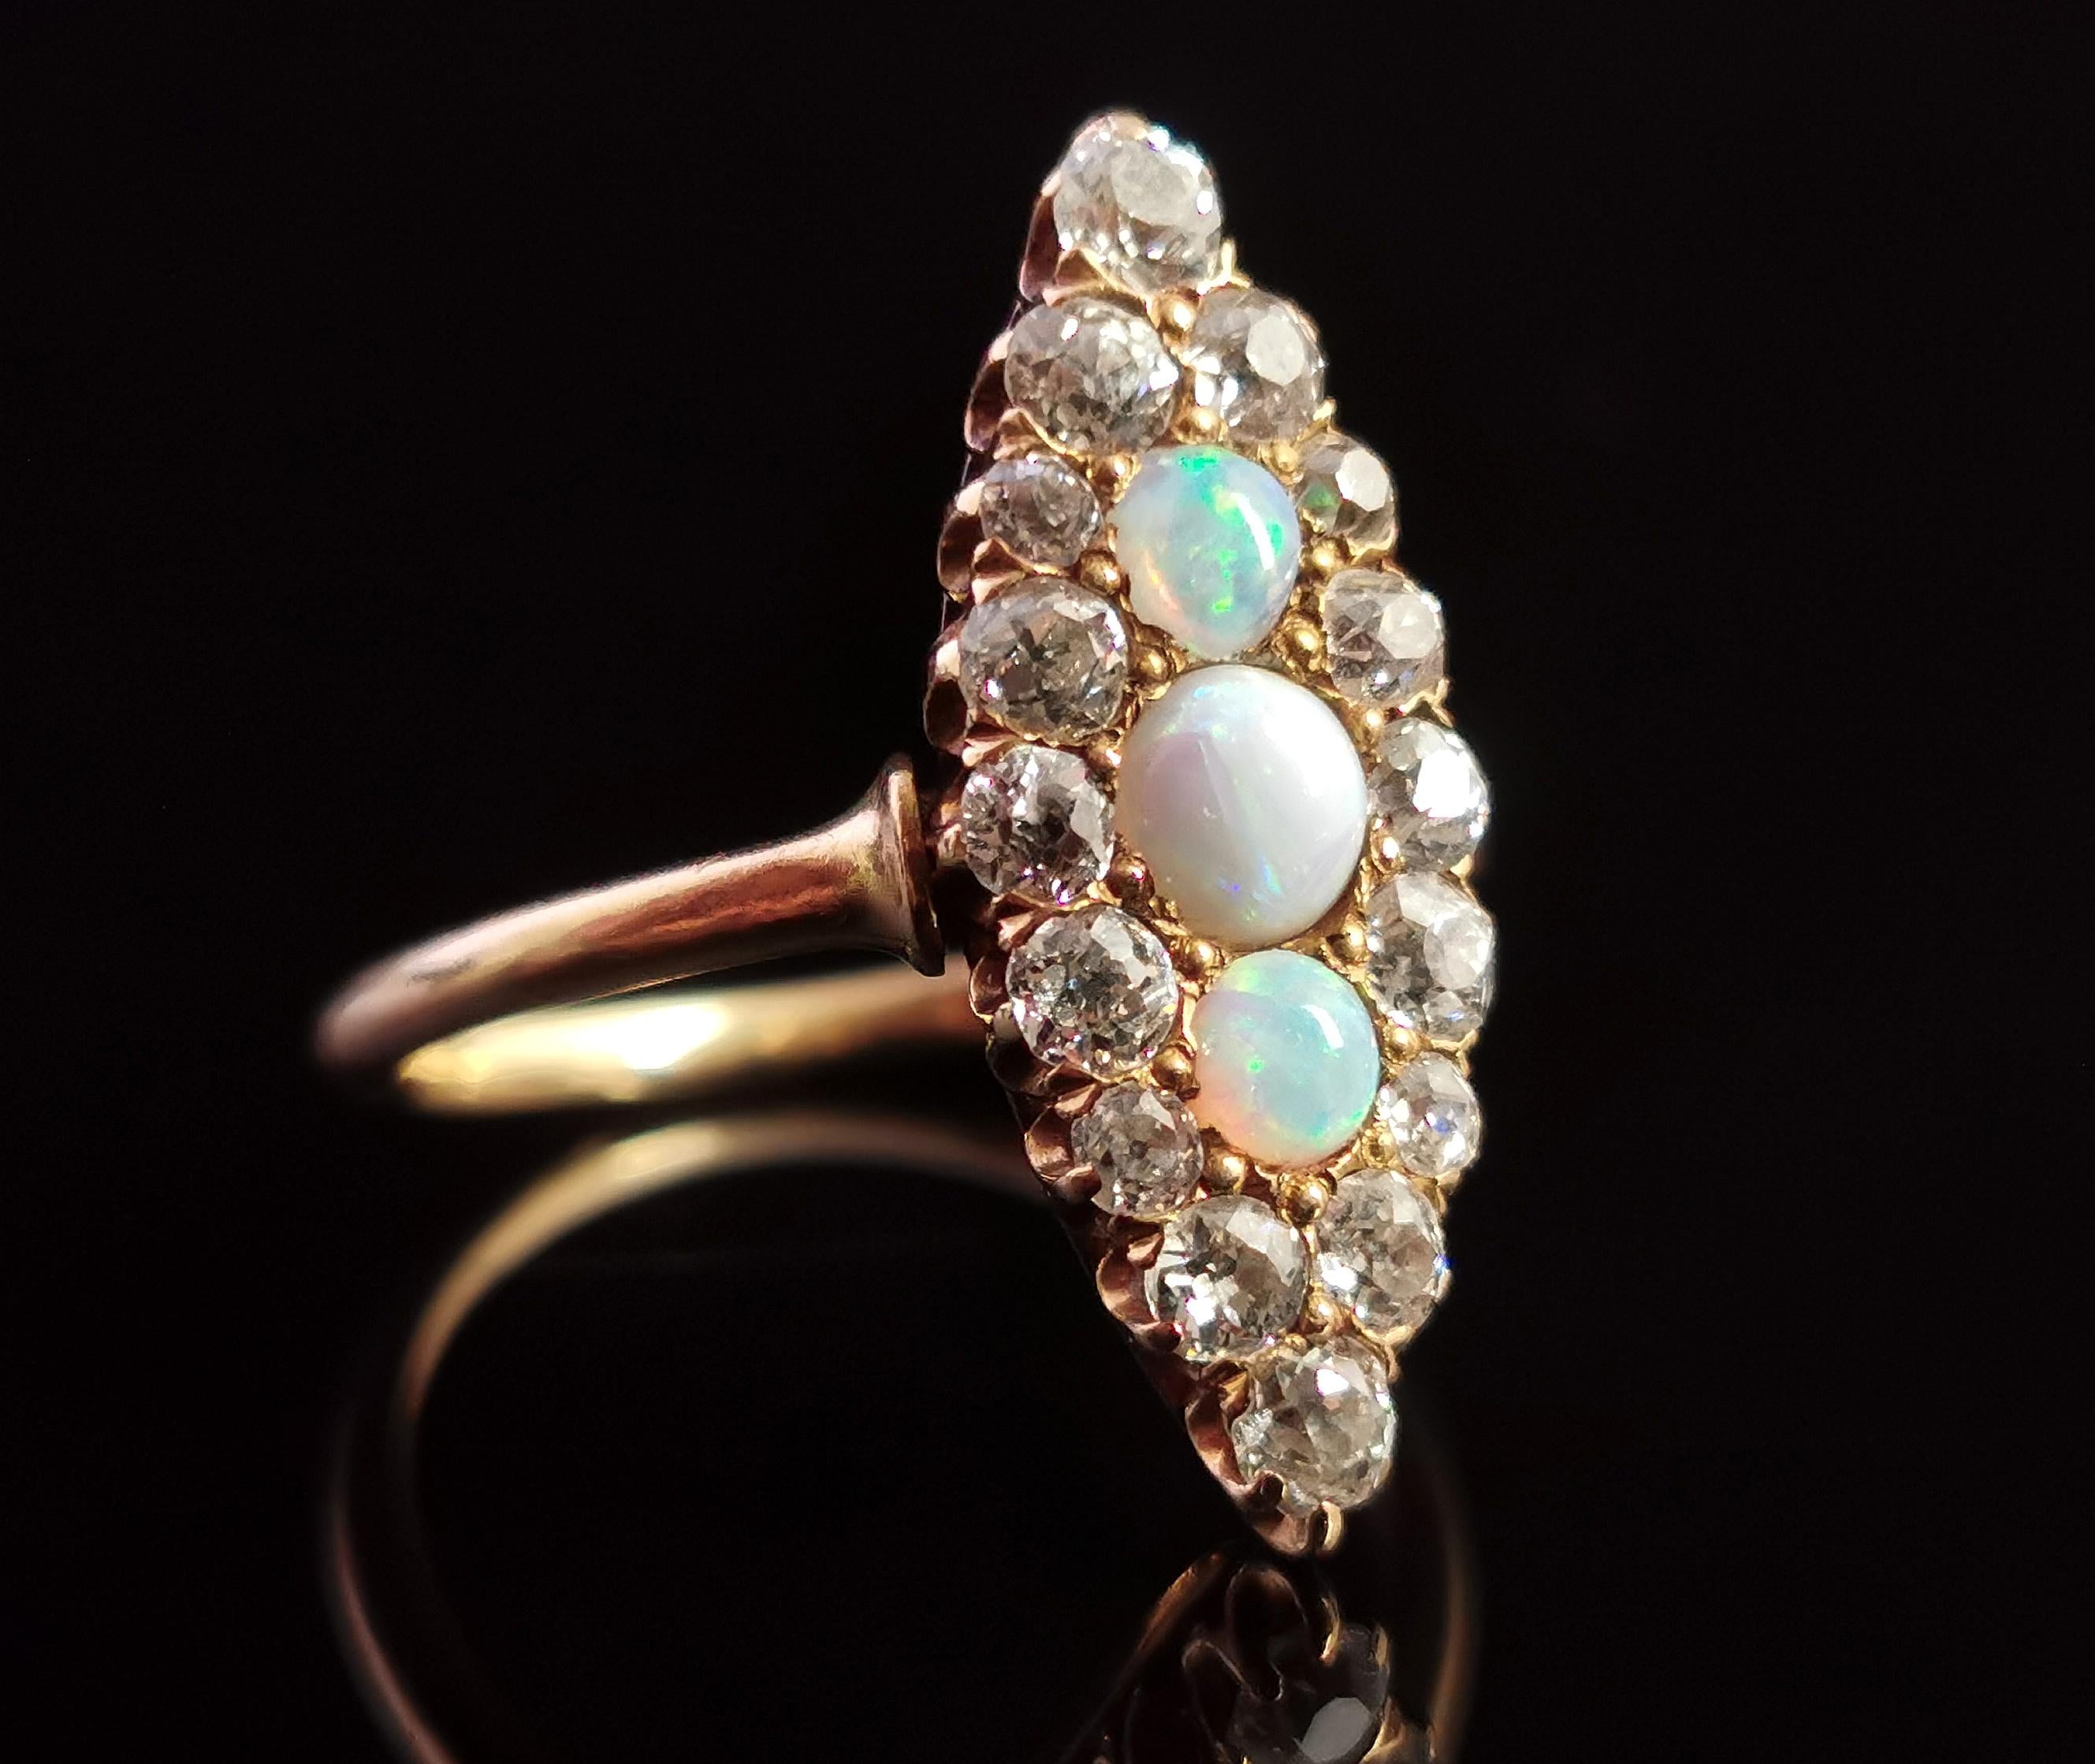 An absolutely stunning antique Opal and diamond navette ring in 18ct yellow gold.

Three beautiful glowing opals set to the centre of the face, the largest in the centre with two smaller ones above and below, they have a beautiful array of colours